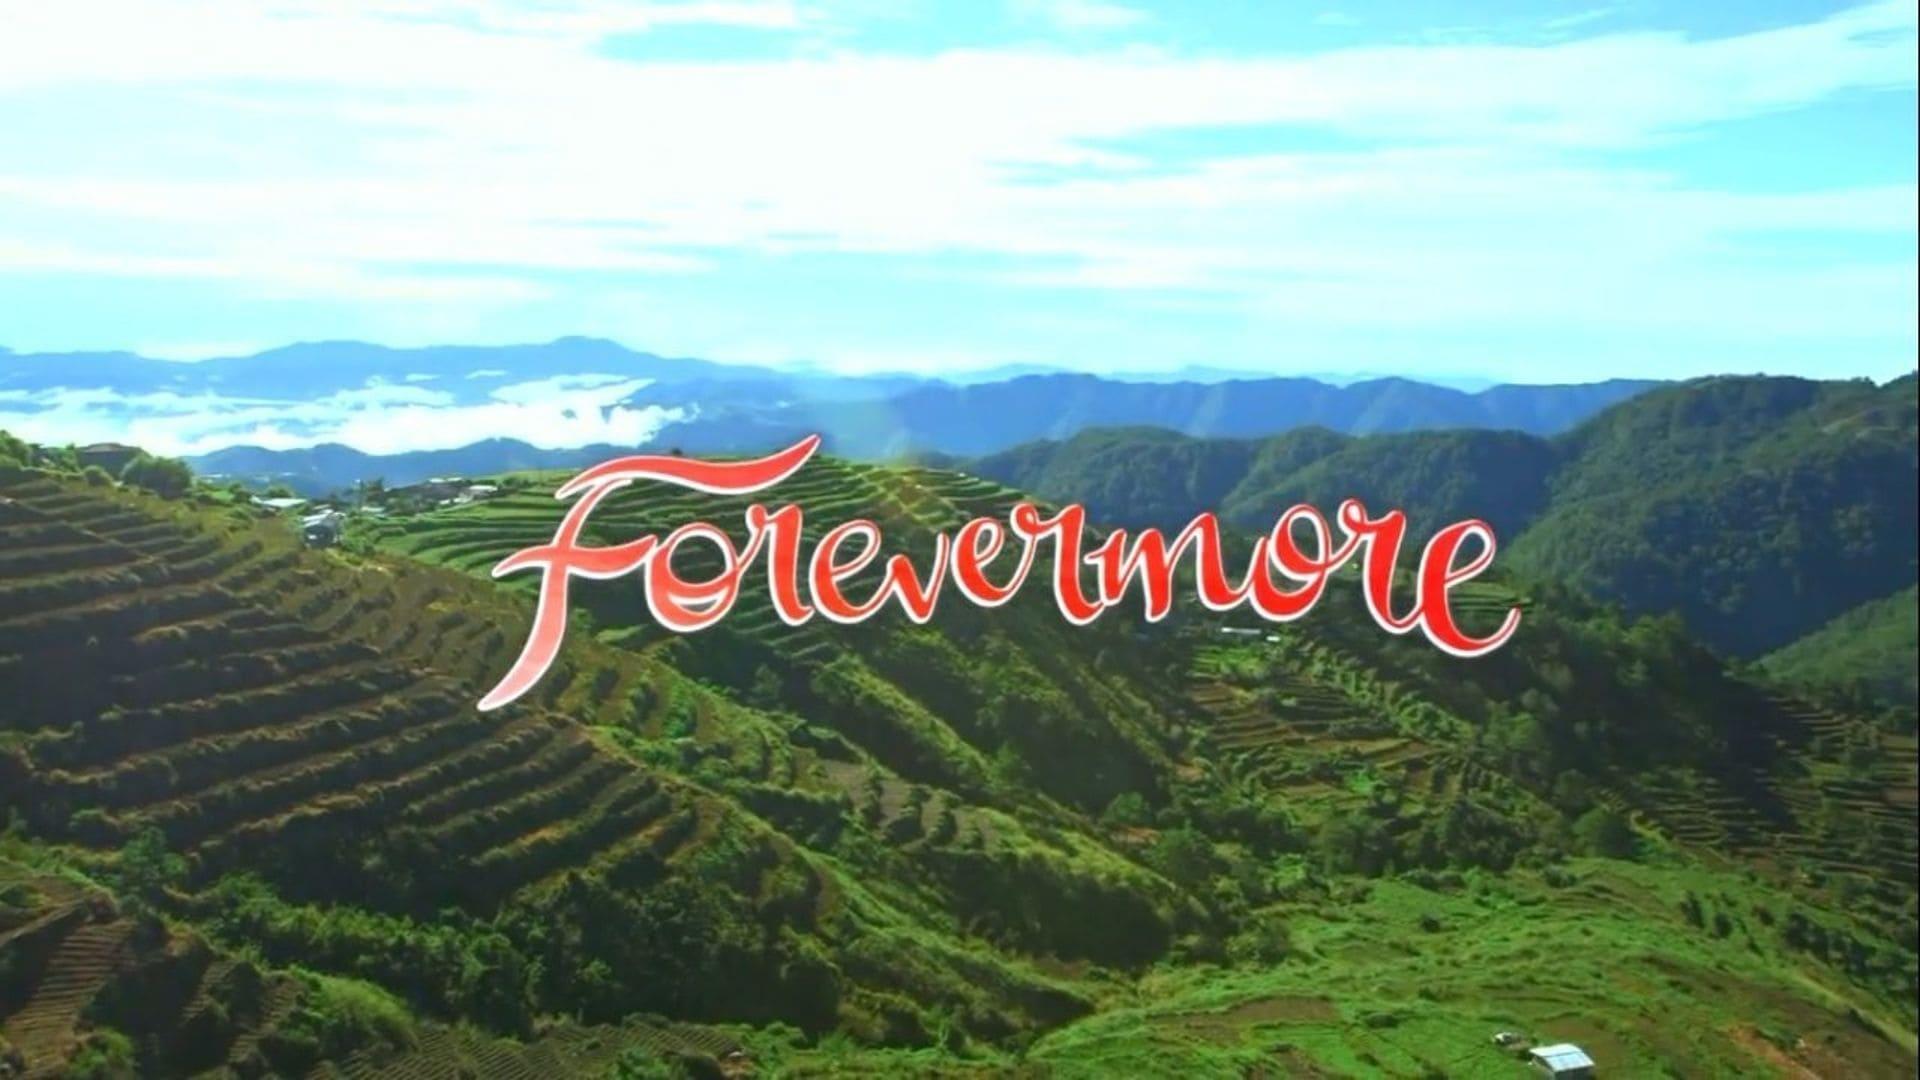 Forevermore backdrop